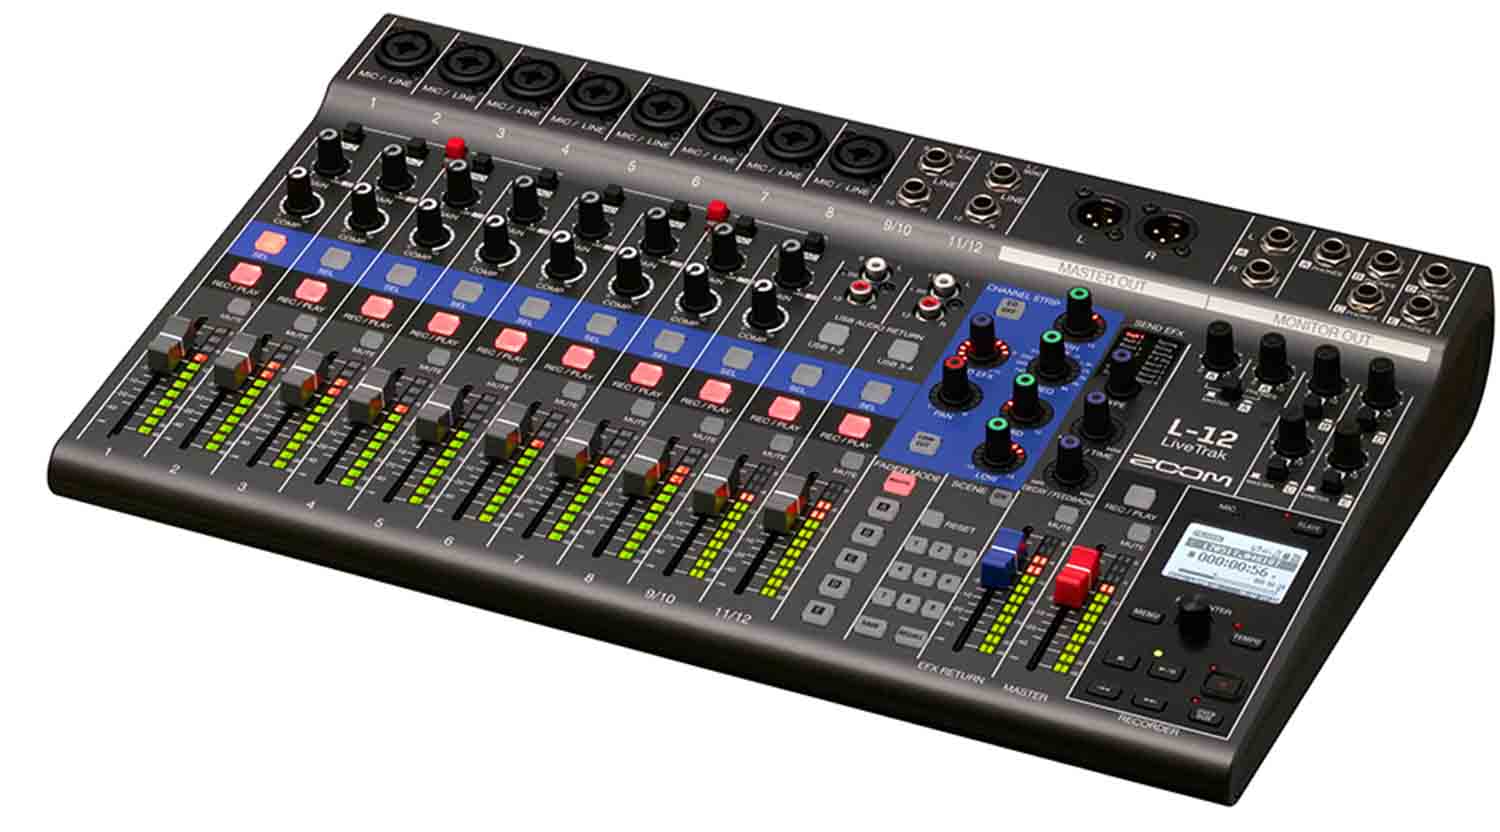 Open Box: Zoom LiveTrak L-12, 12 Channels Mixer With 12 Track Playback - Hollywood DJ